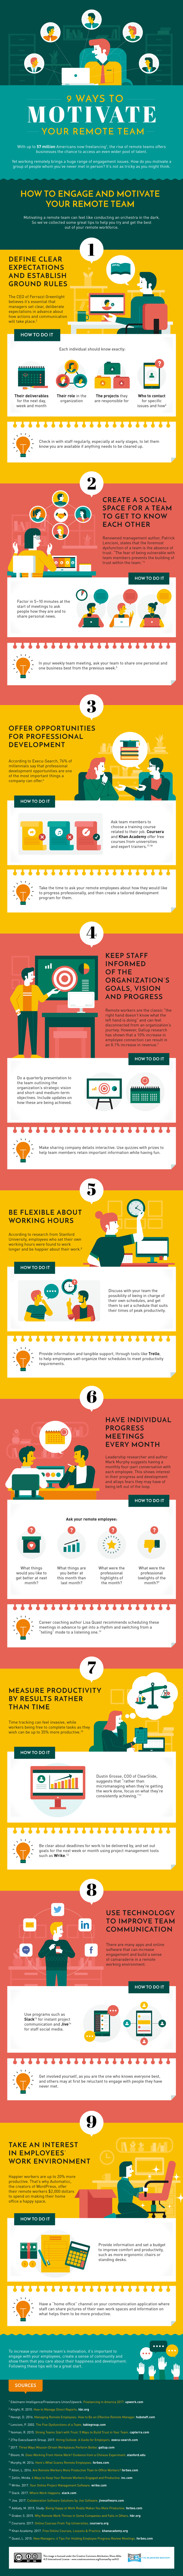 9 Ways to Motivate Your Remote Team - #infographic